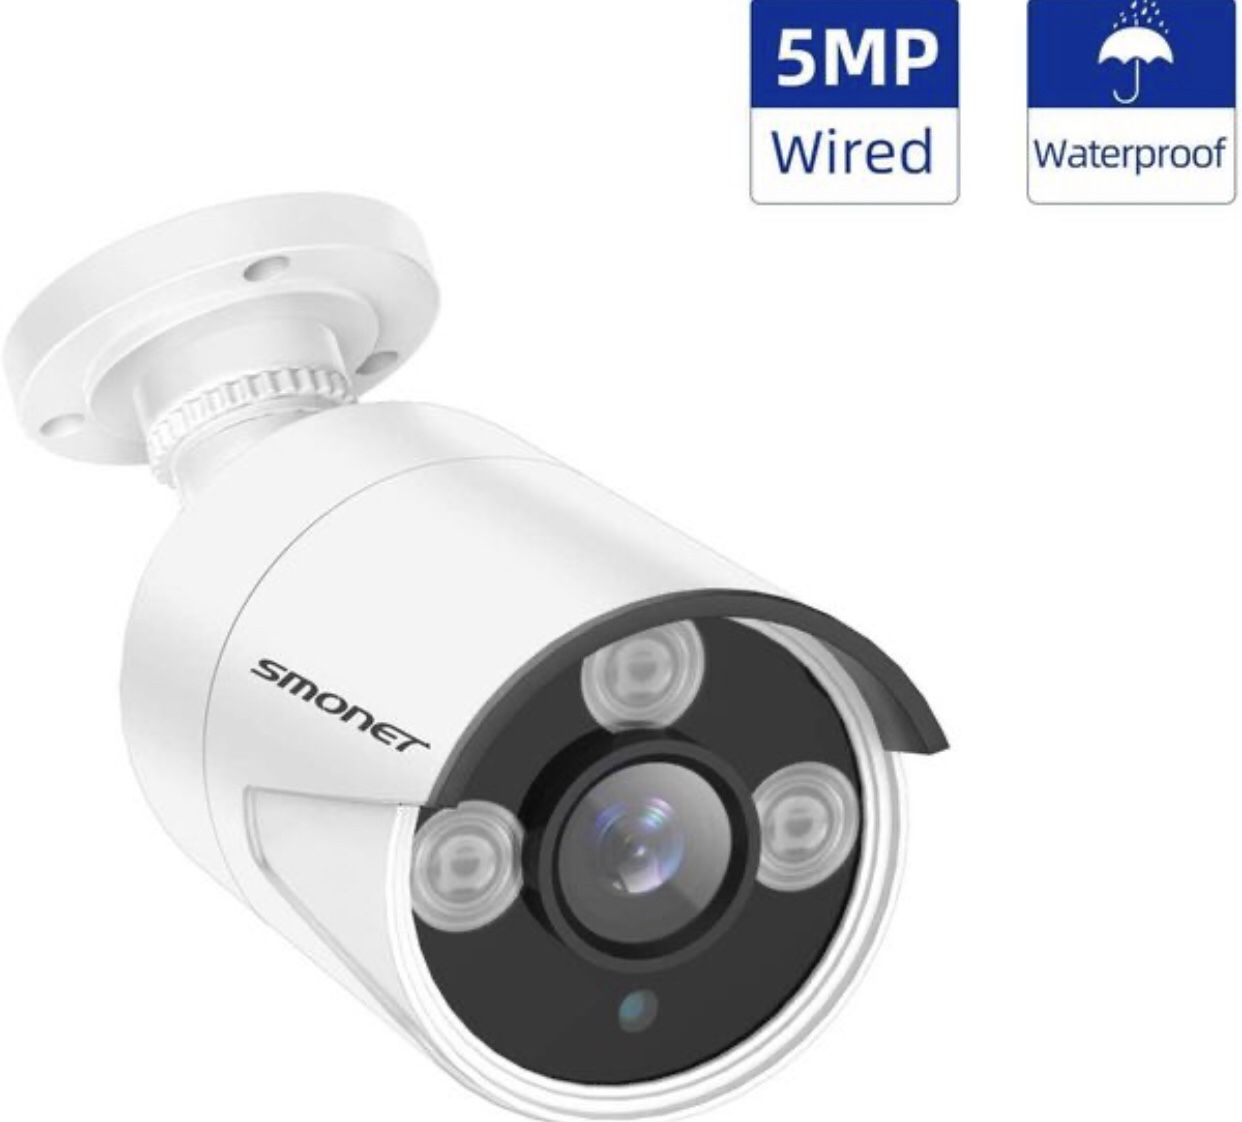 New 5MP Security Camera Waterproof wireless Connect with NVR